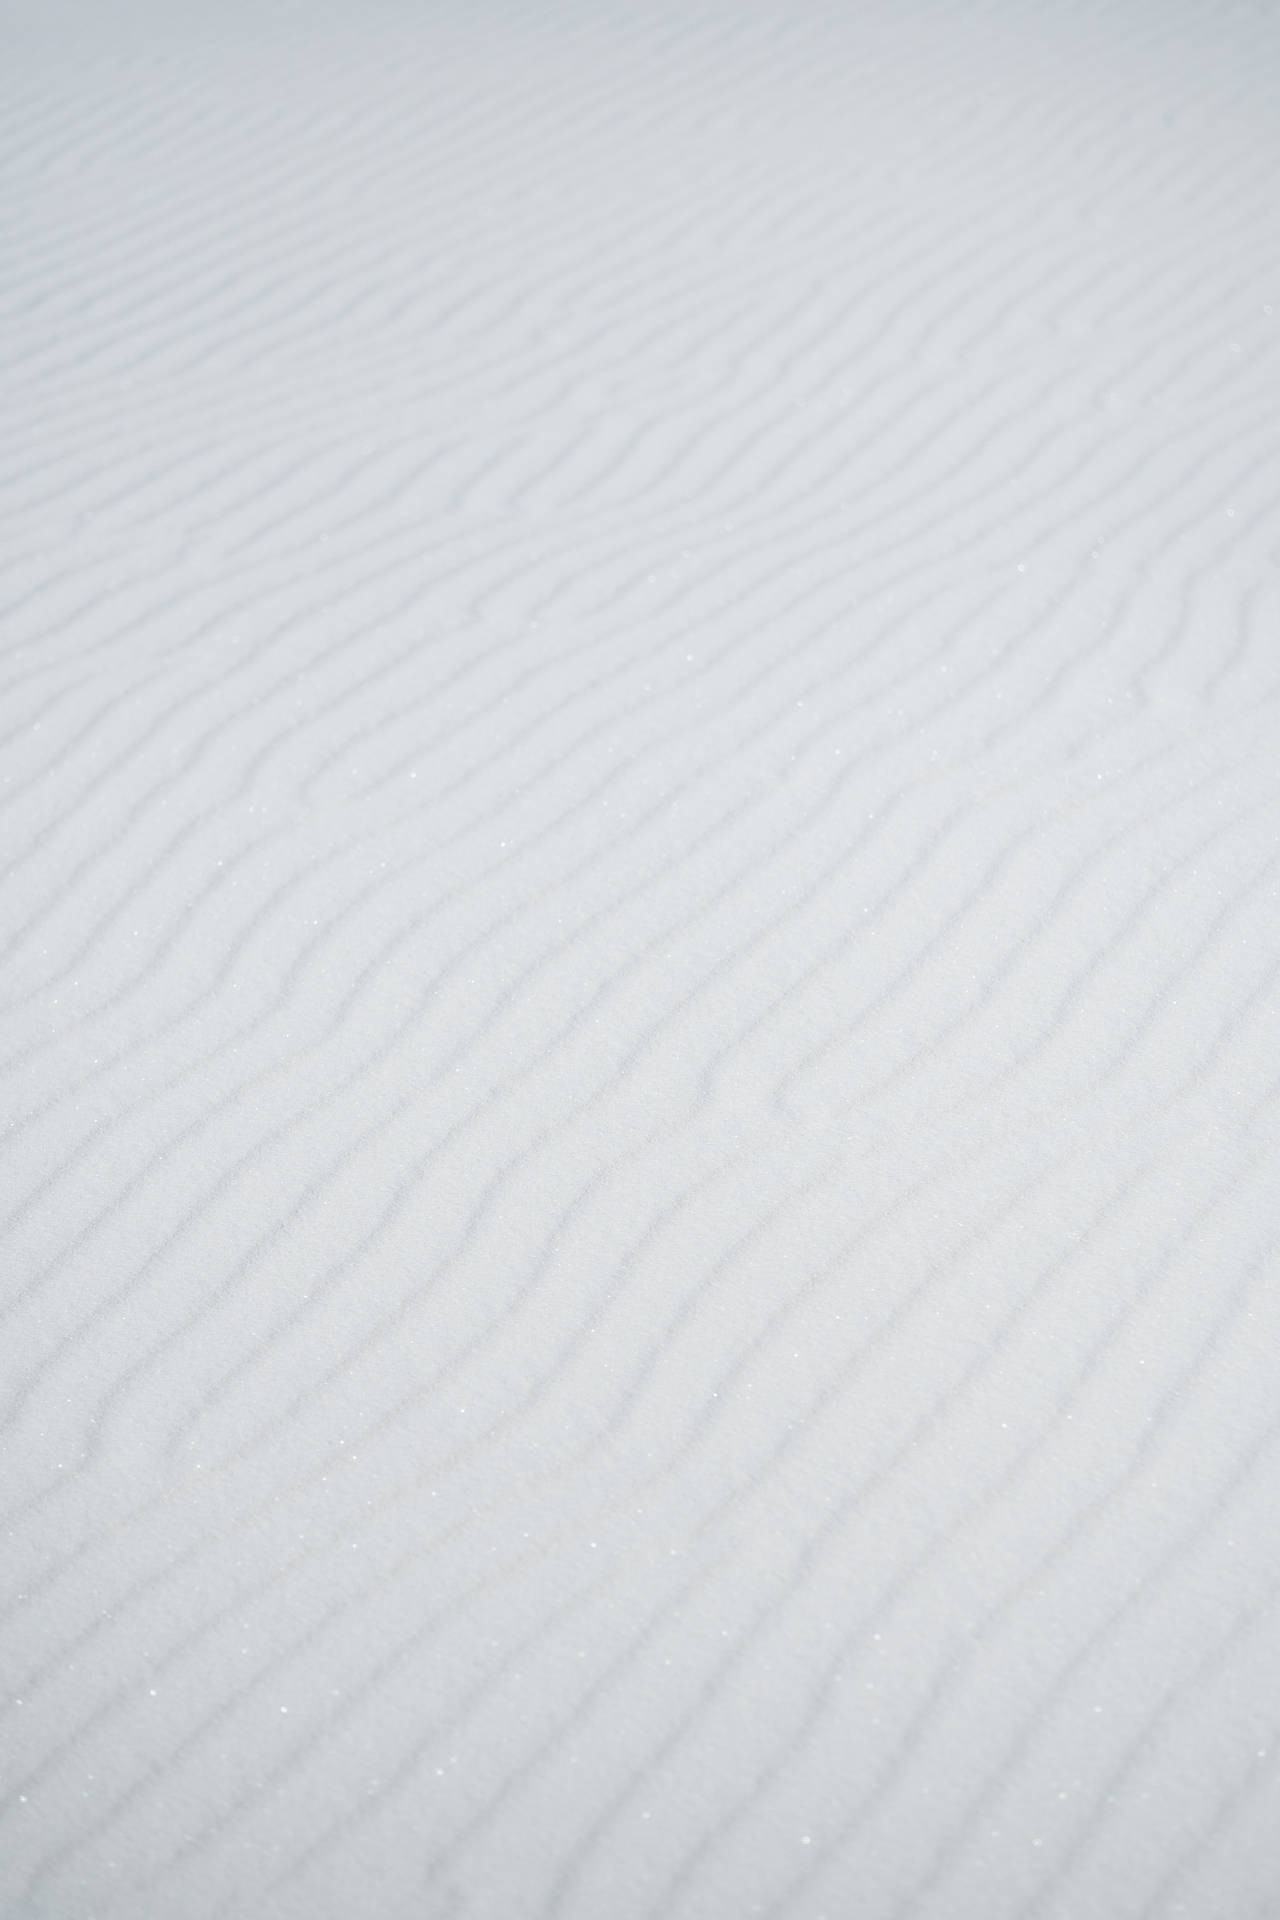 White Screen With Abstract Waves Picture